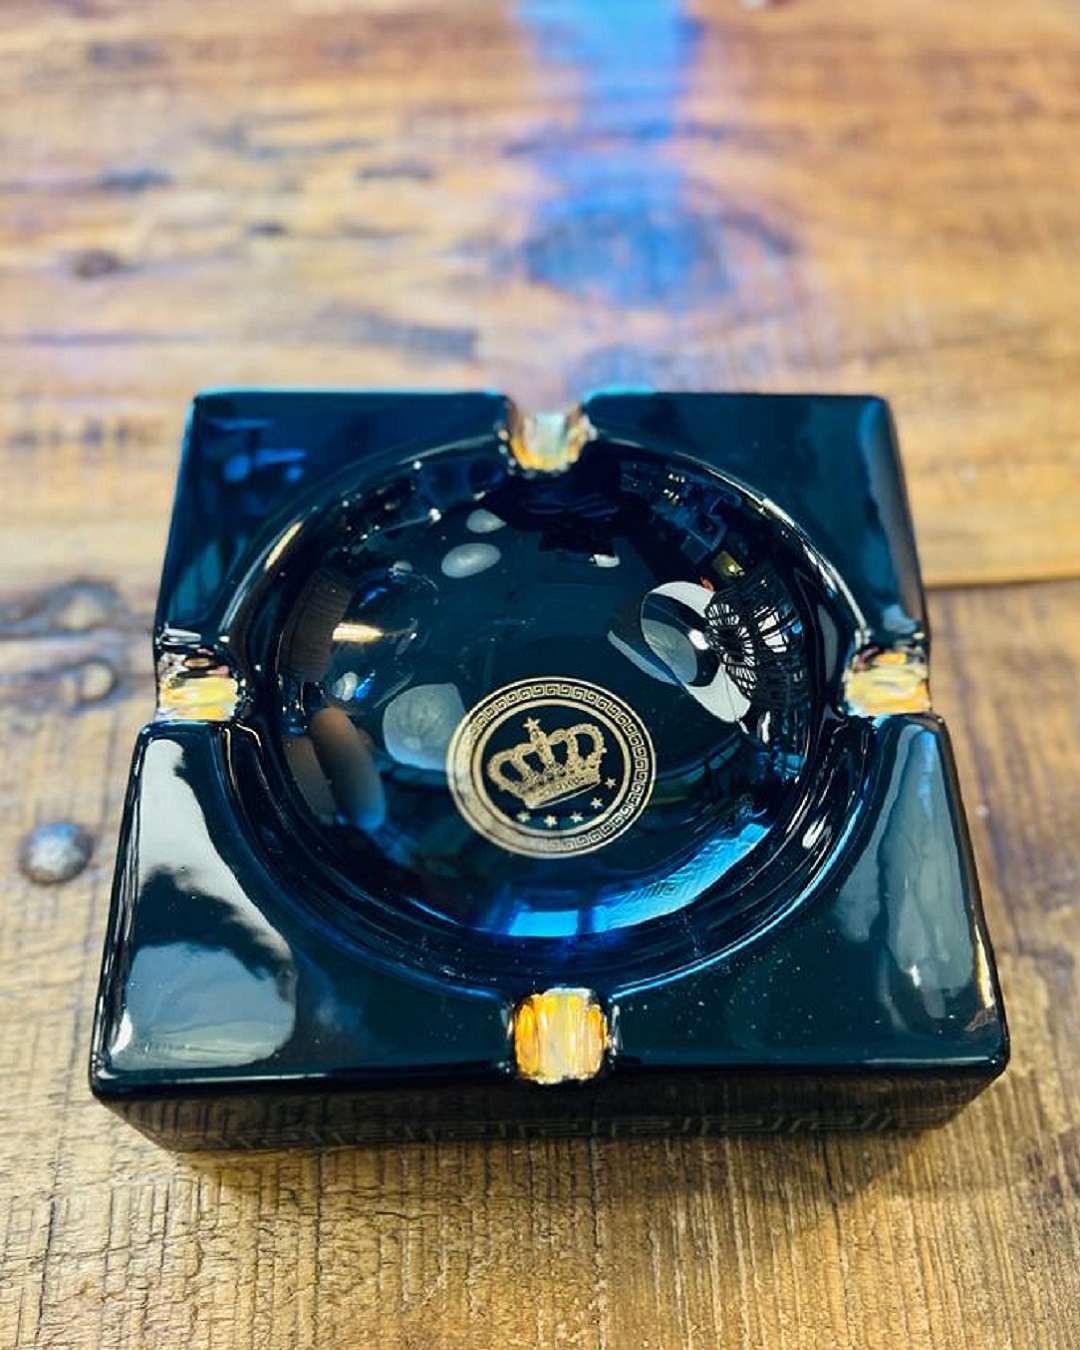 Black nordic ashtray with gold crown in middle